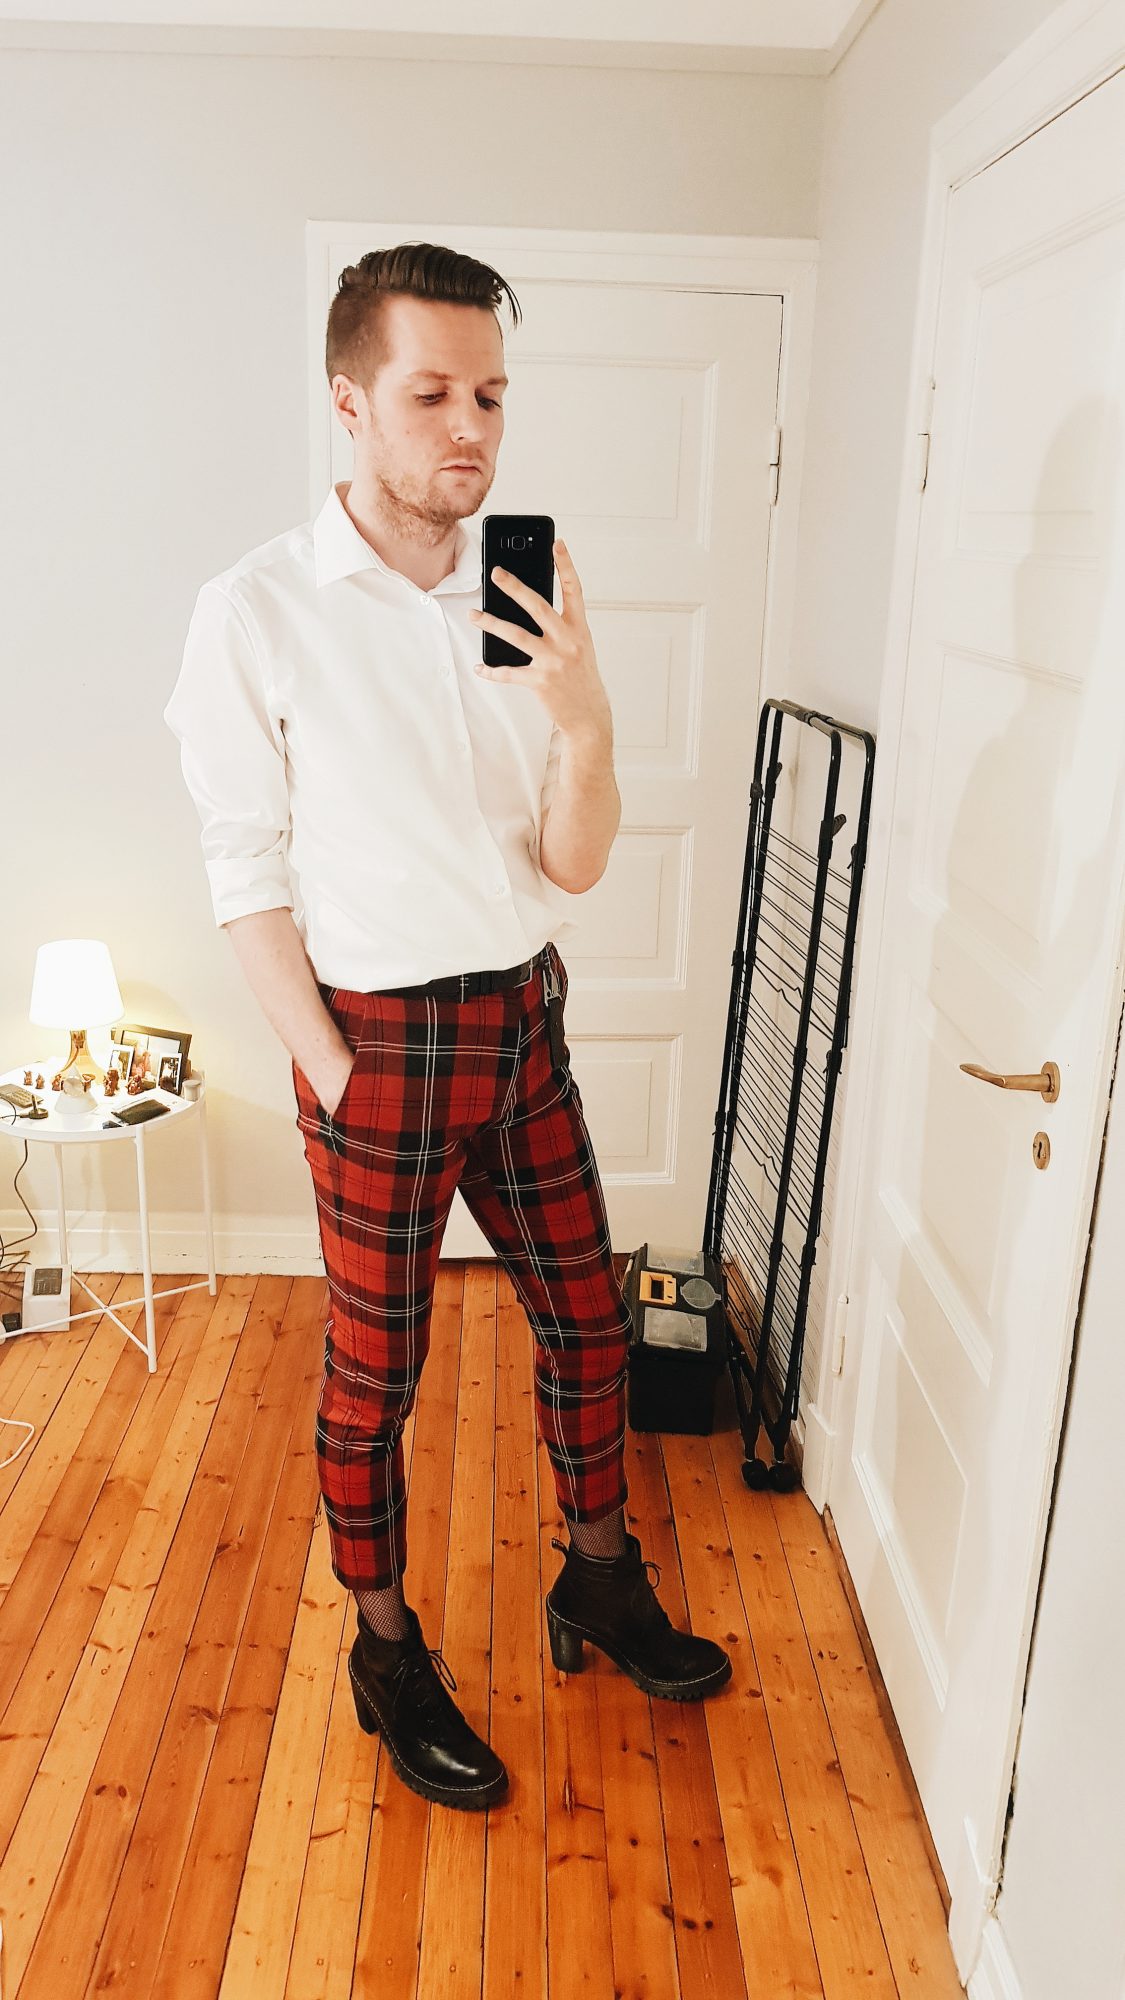 New trousers? Check.